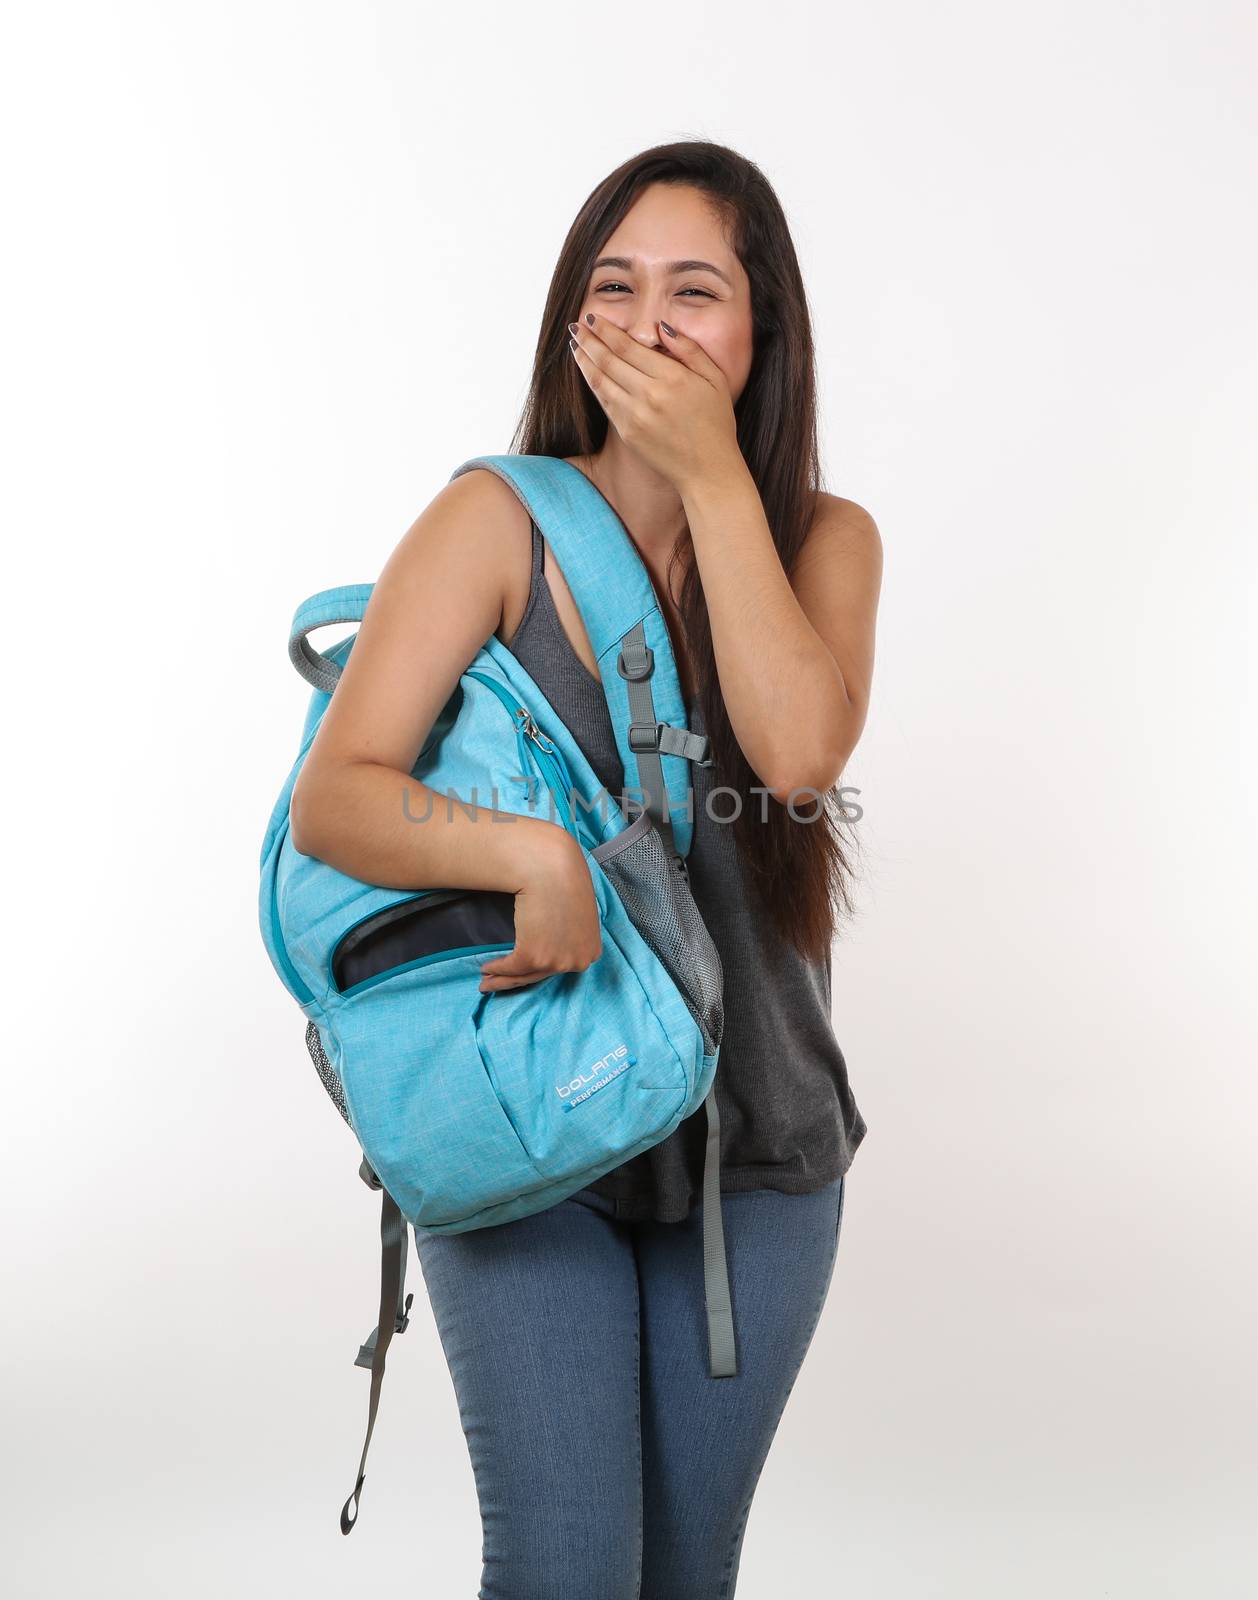 A young student laughs as she reaches for her backpack.